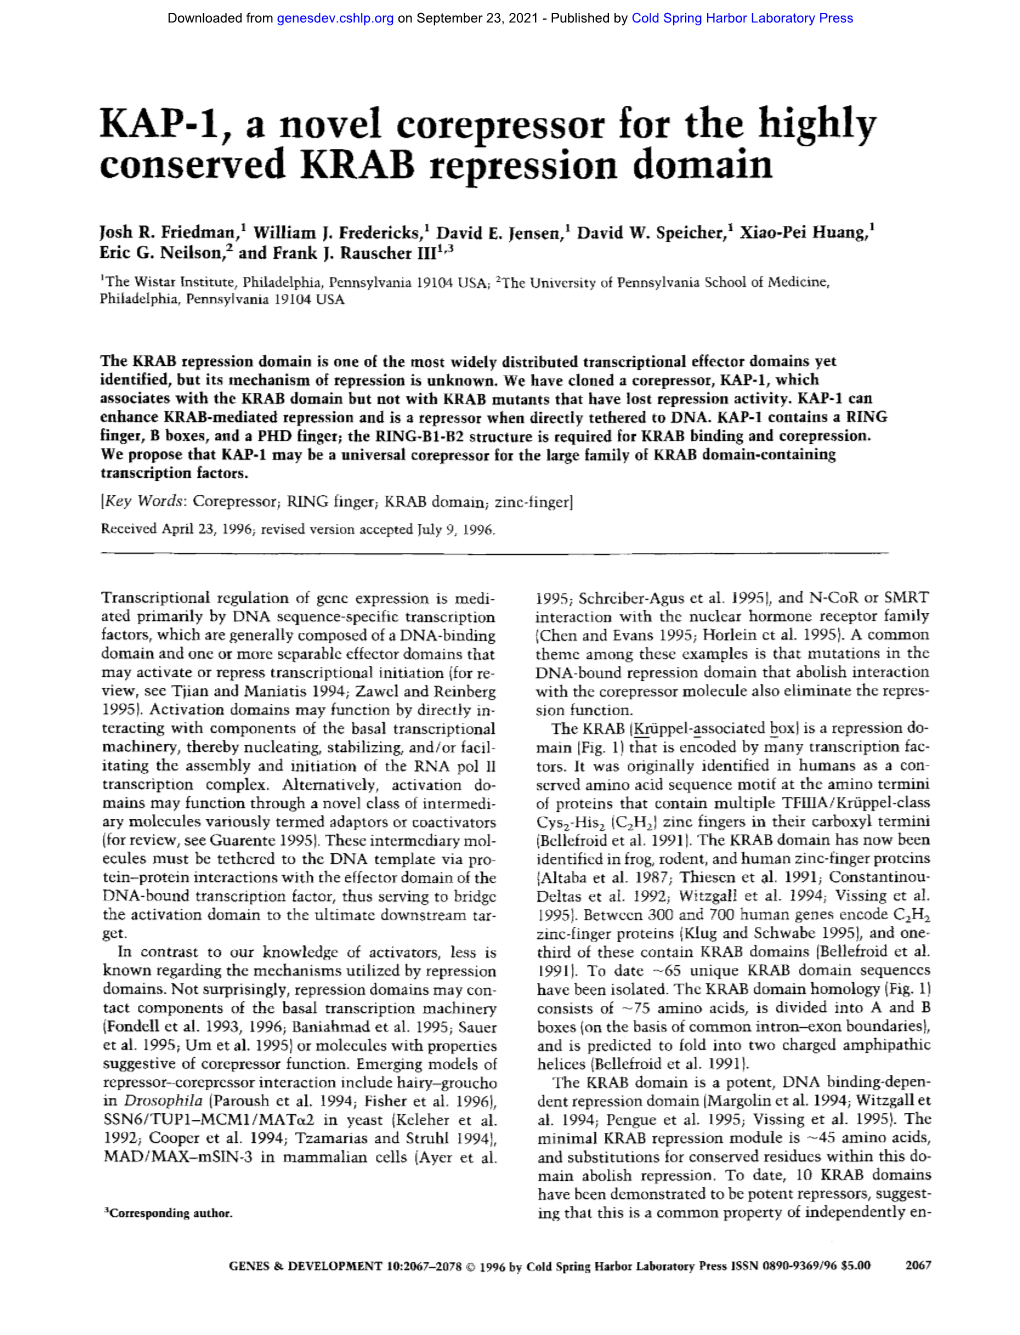 KAP-1, a Novel Corepressor for the Highly Conserved KRAB Repression Domain